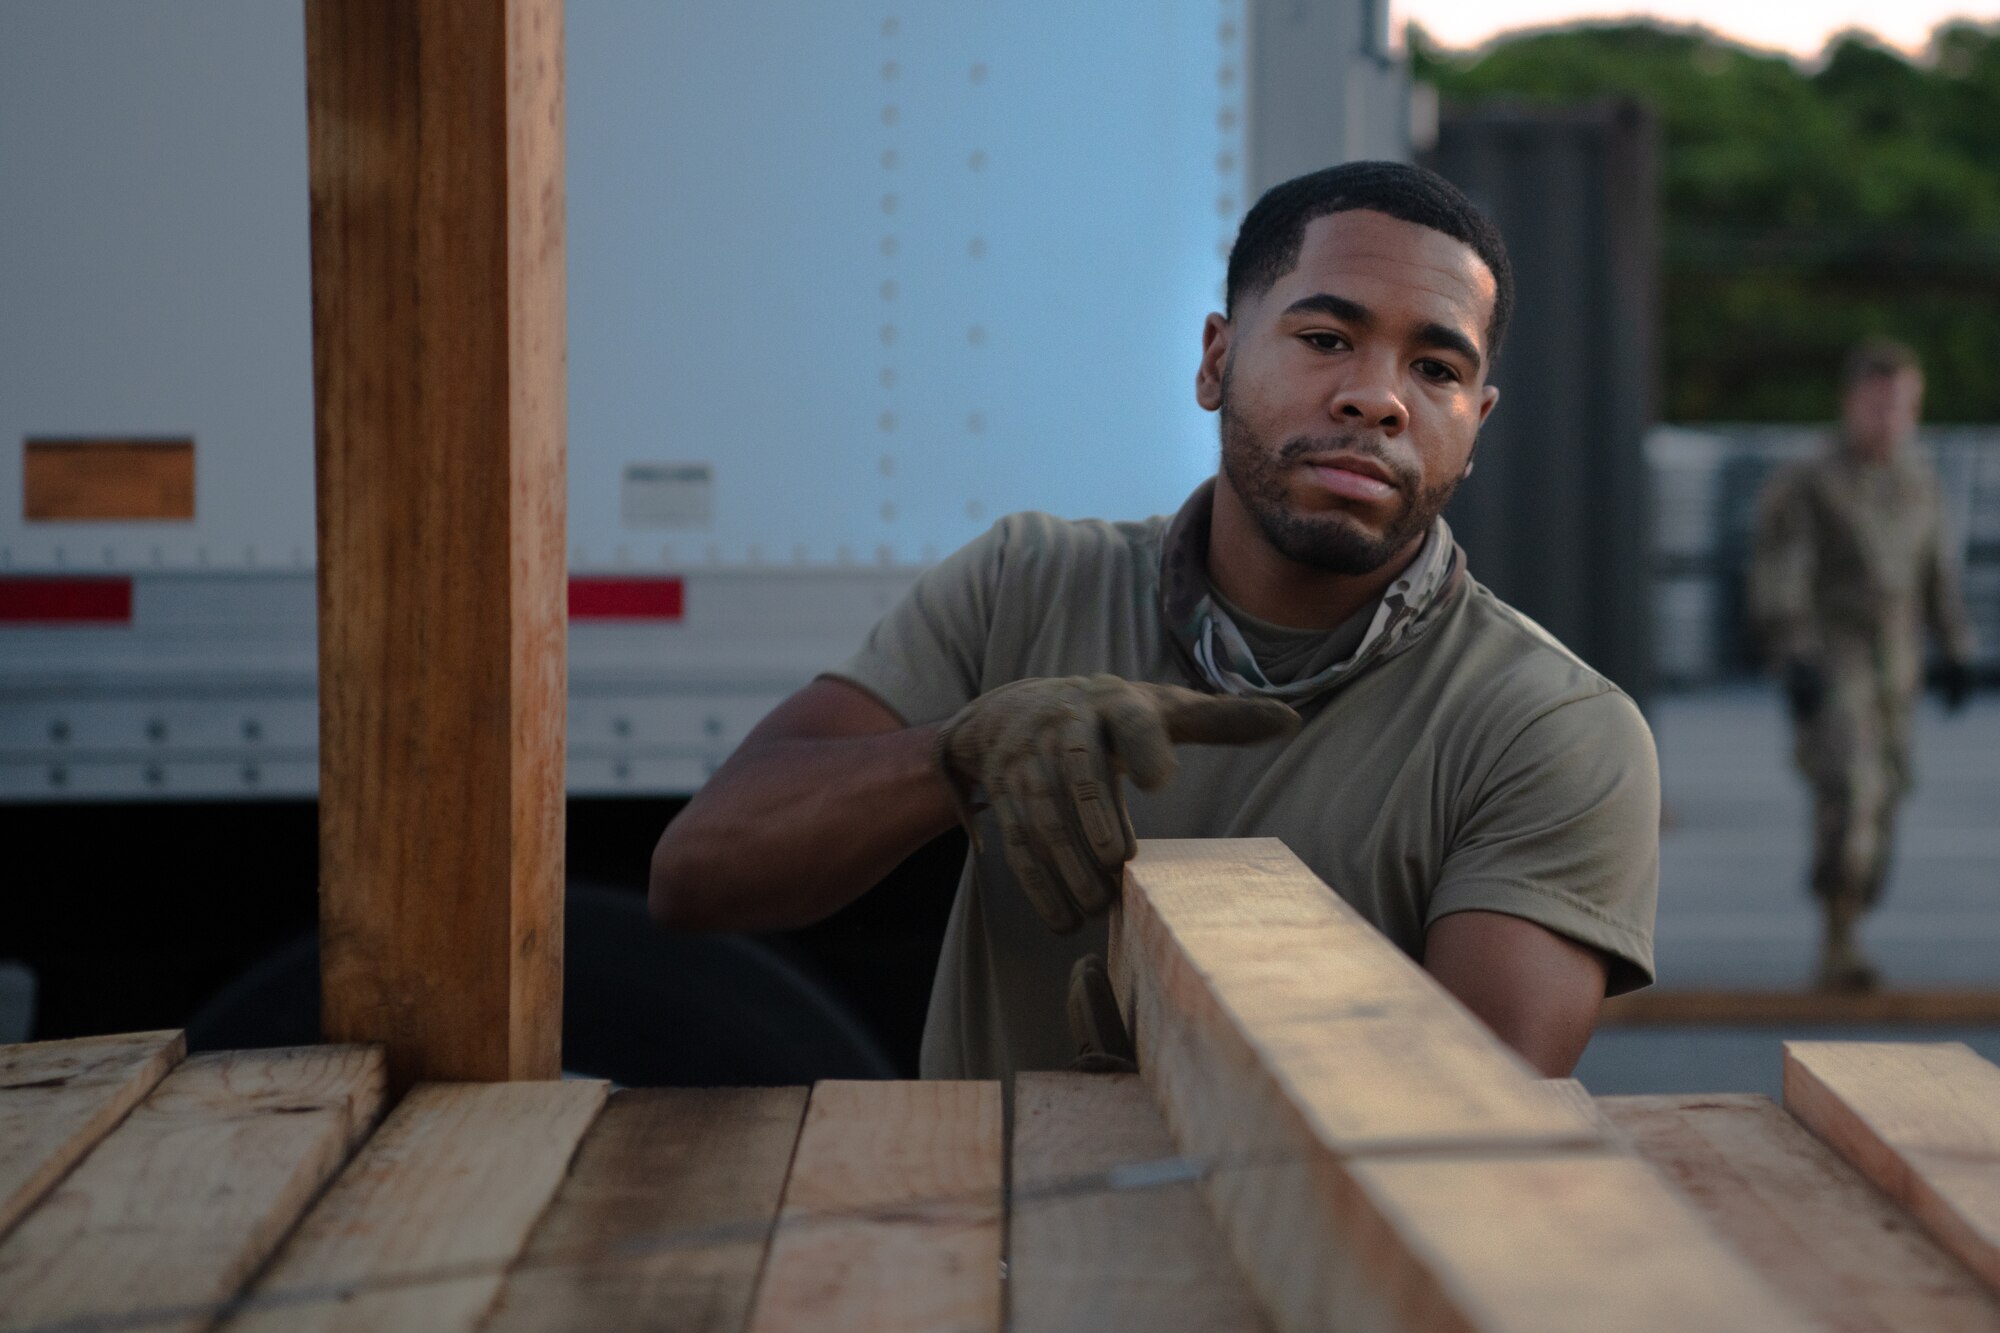 U.S. Air Force Senior Airman Tyrone Smith-Hasty, 18th Logistics Readiness Squadron ground transportation operator, prepares boards for a mail shipment at Kadena Air Base, Japan, July 31, 2021. Airmen from the 18th LRS move over 18.5-million tons of cargo and 114-thousand passengers annually. (U.S. Air Force photo by Airman 1st Class Stephen Pulter)